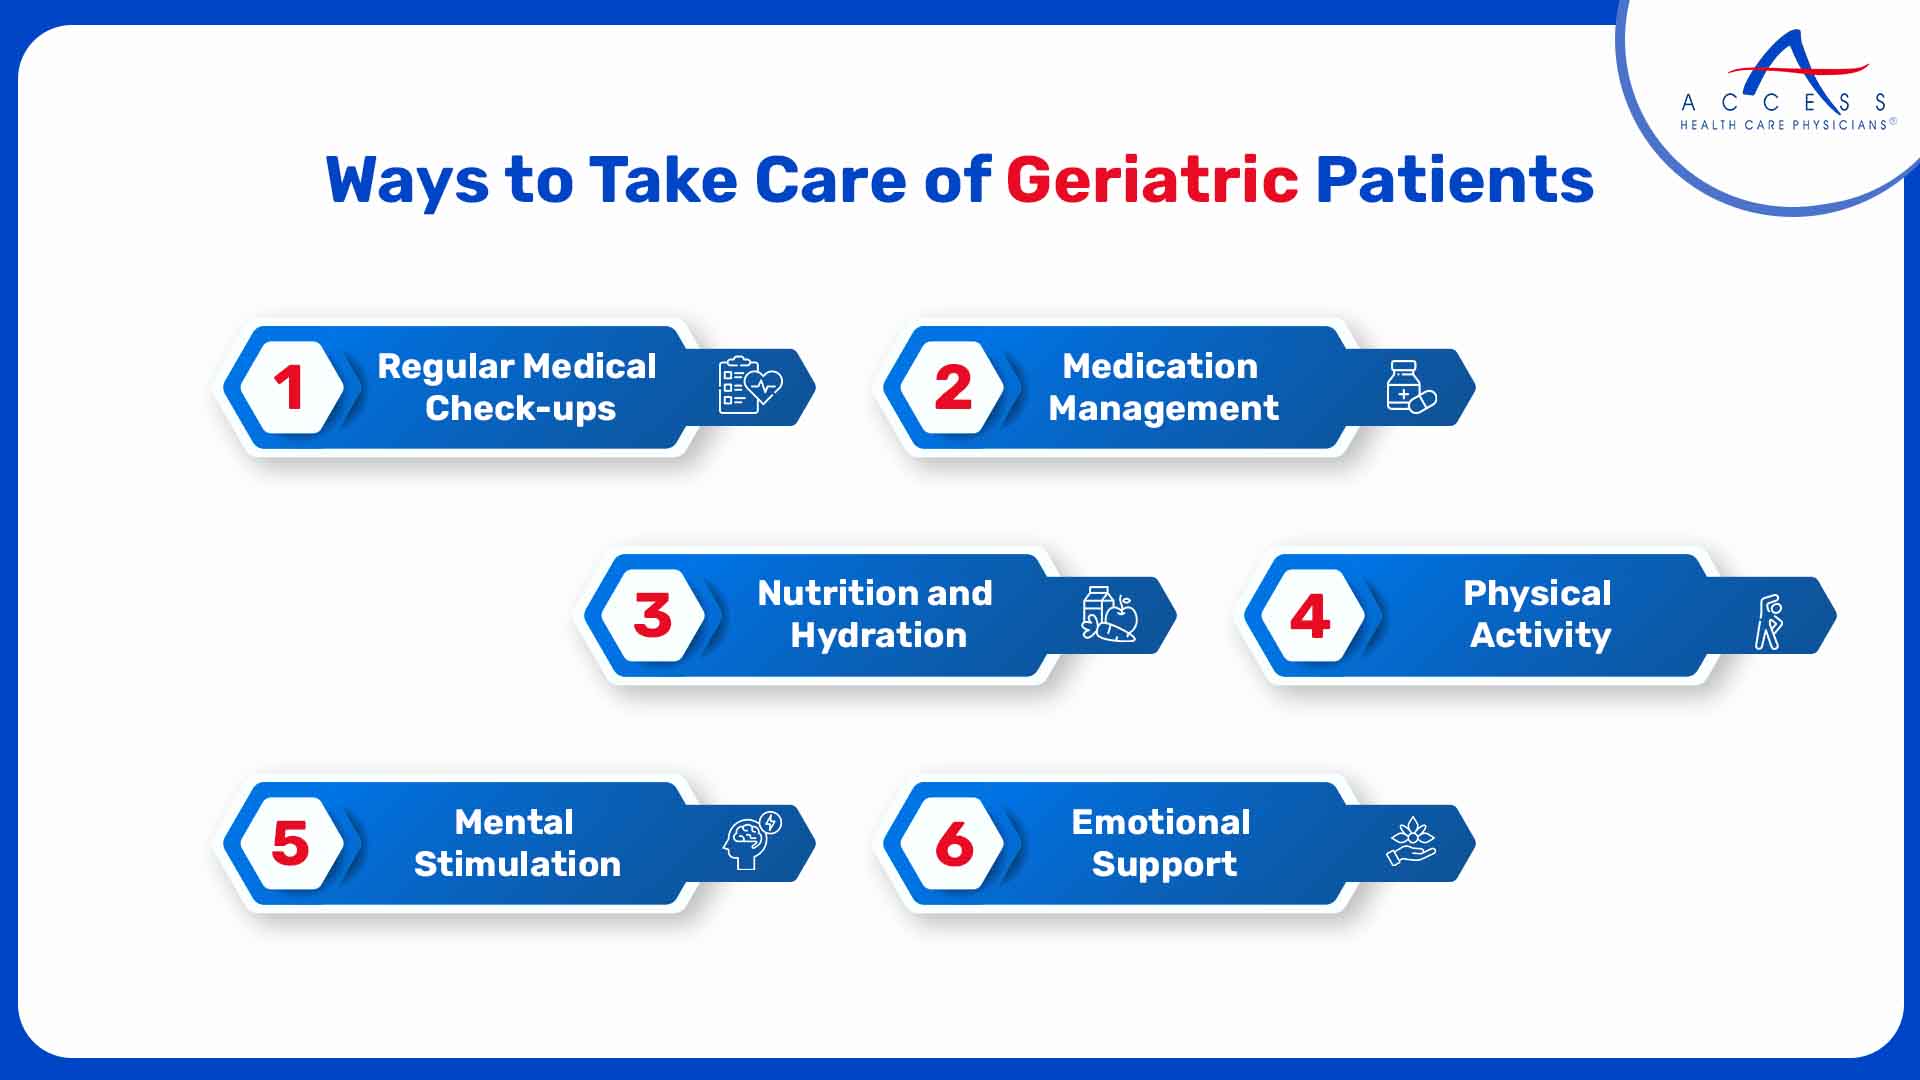 Ways to Take Care of Geriatric Patients